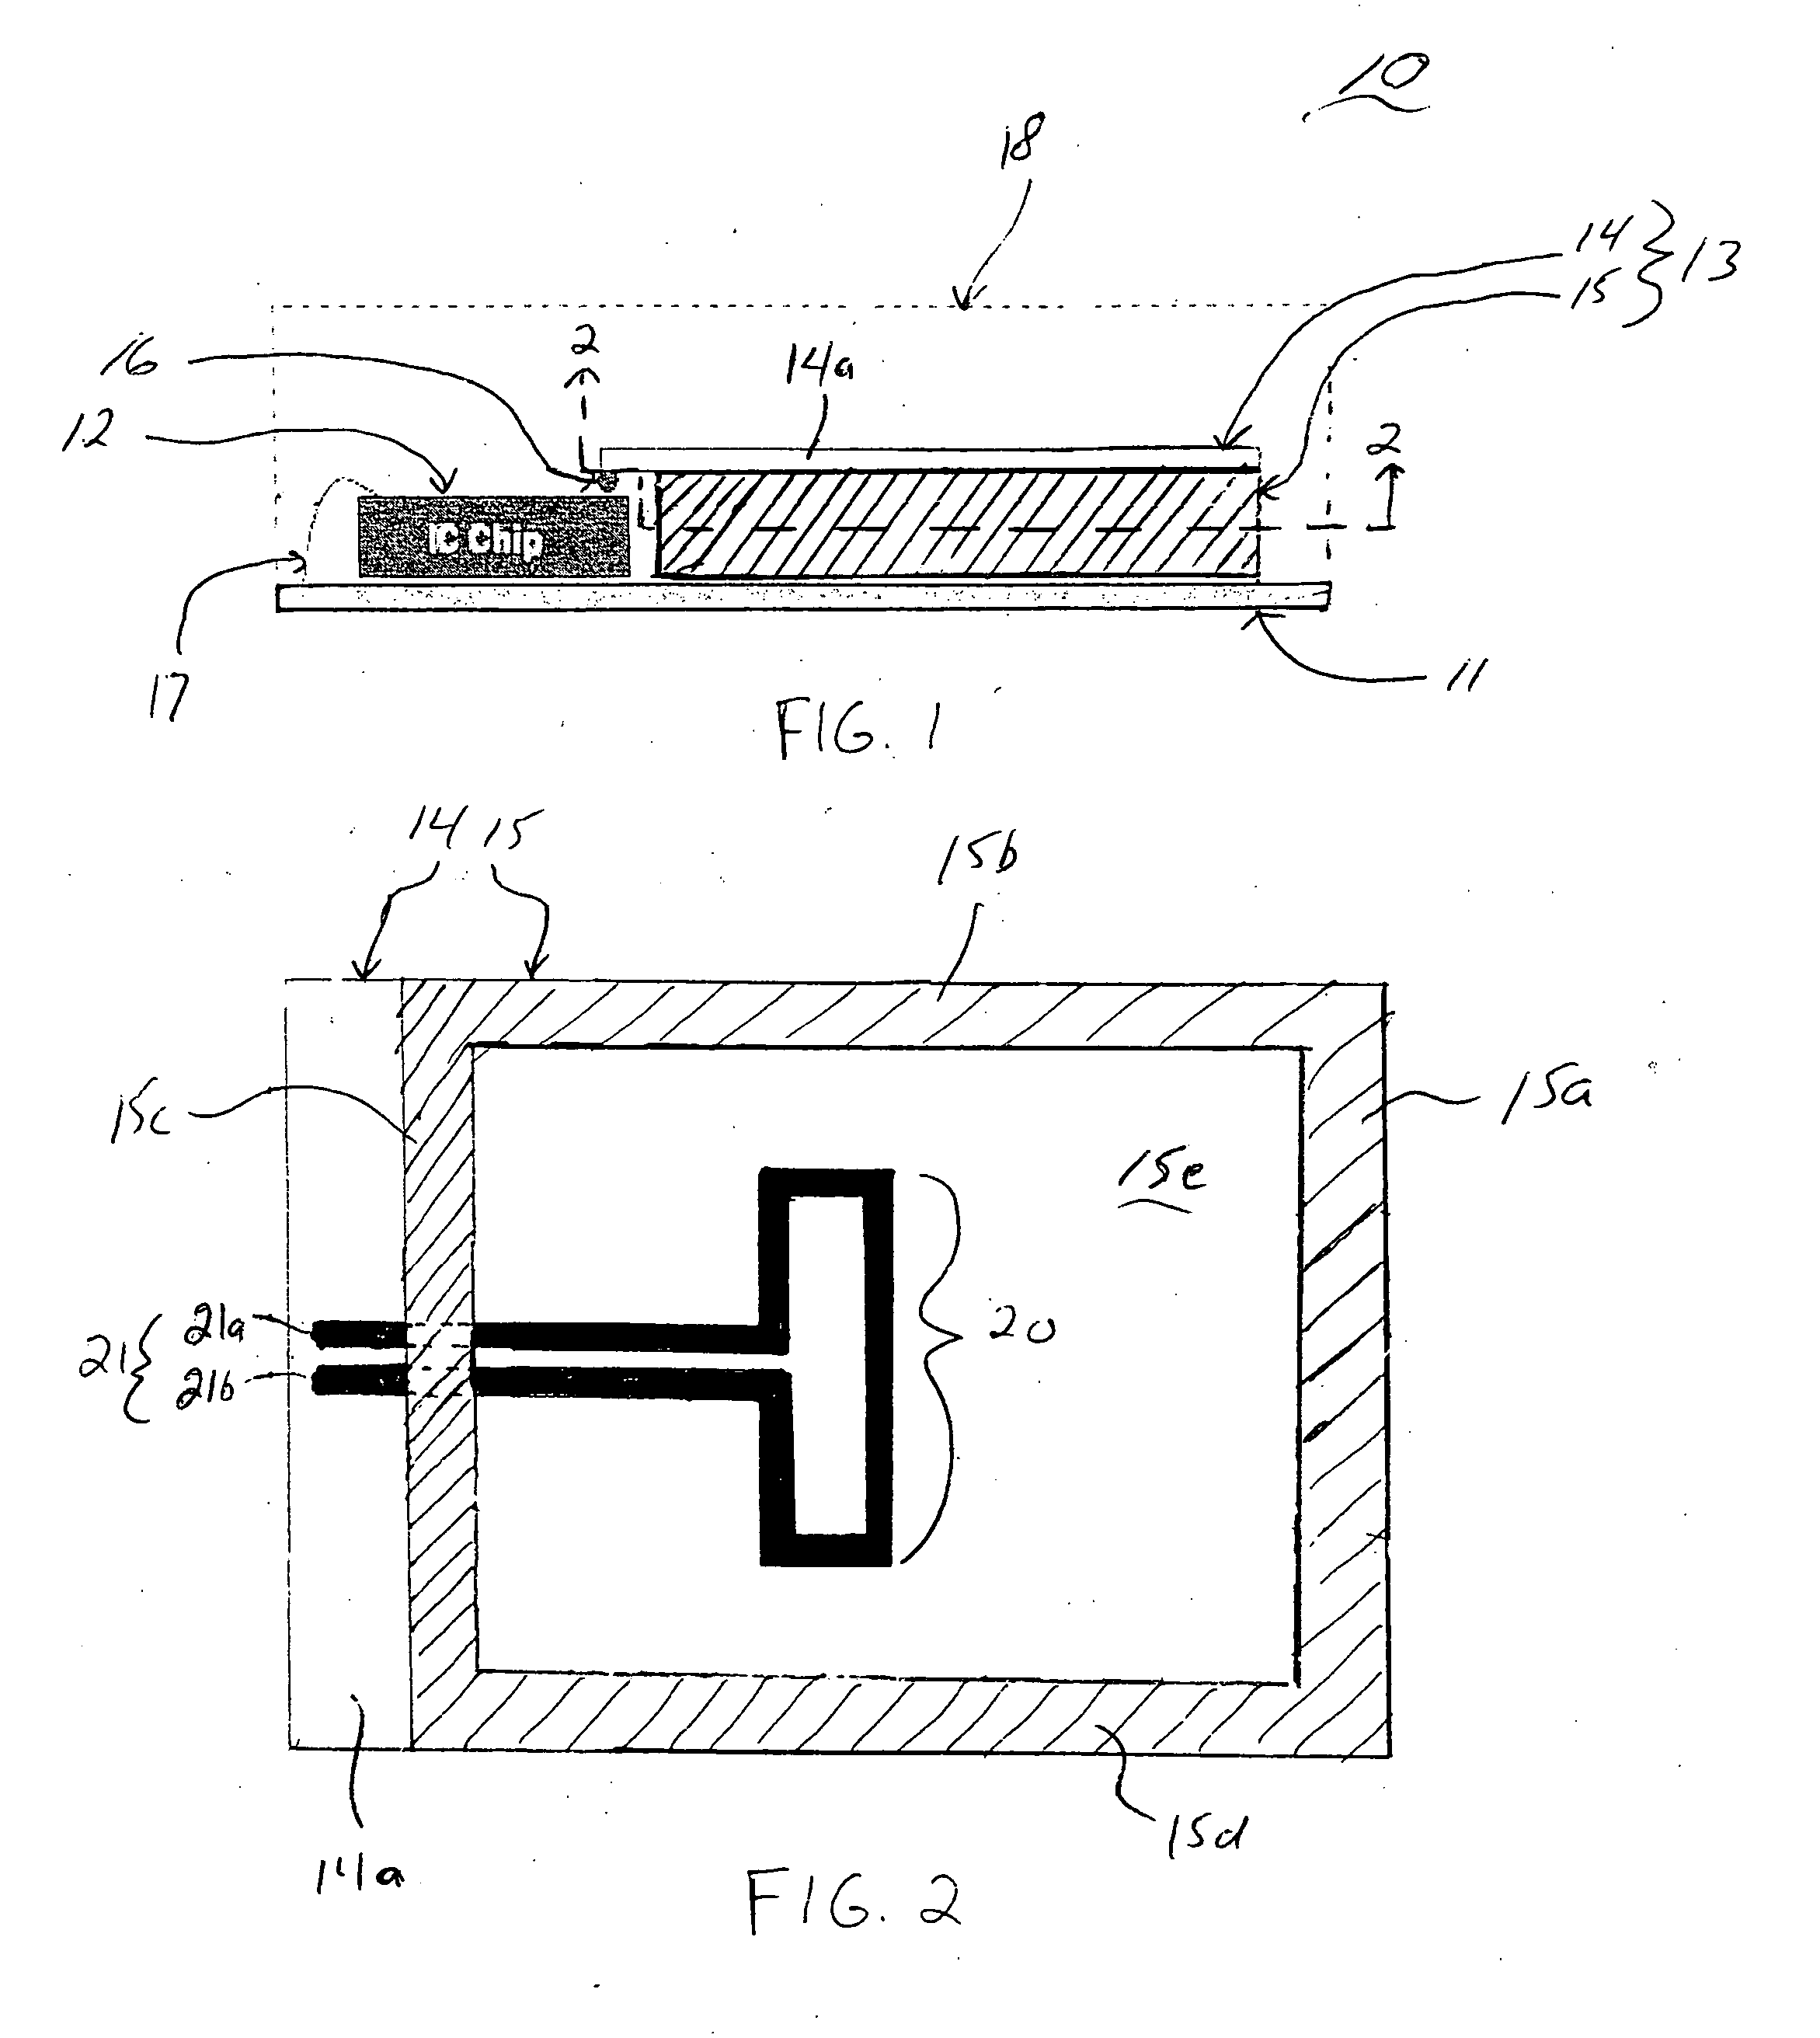 Apparatus and methods for packaging integrated circuit chips with antenna modules providing closed electromagnetic environment for integrated antennas